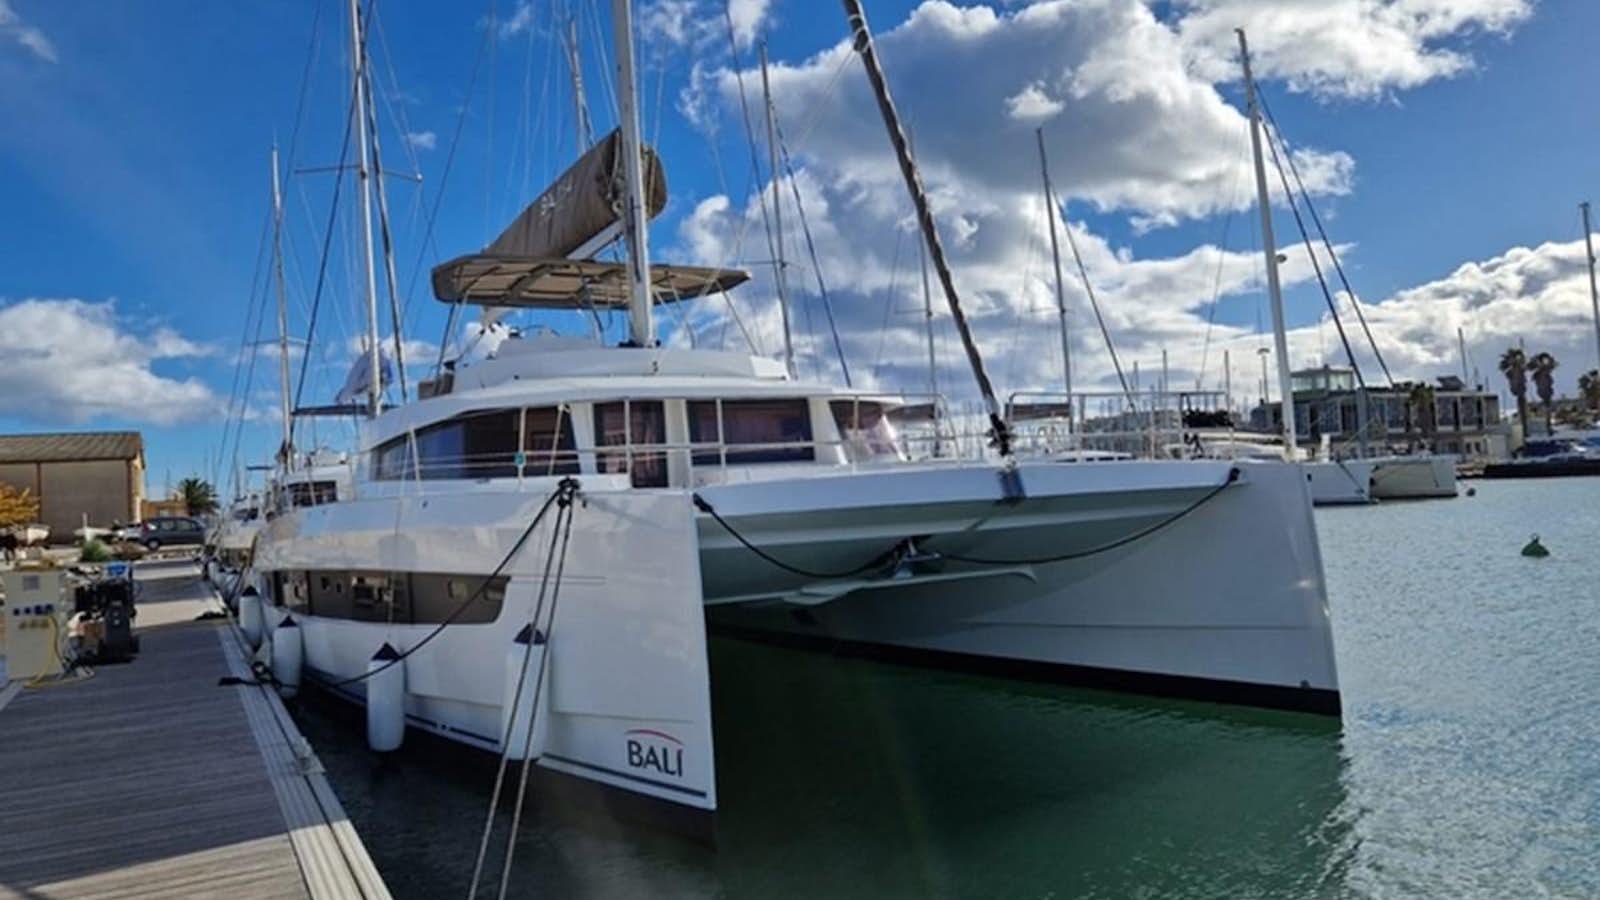 Bali 5.4
Yacht for Sale